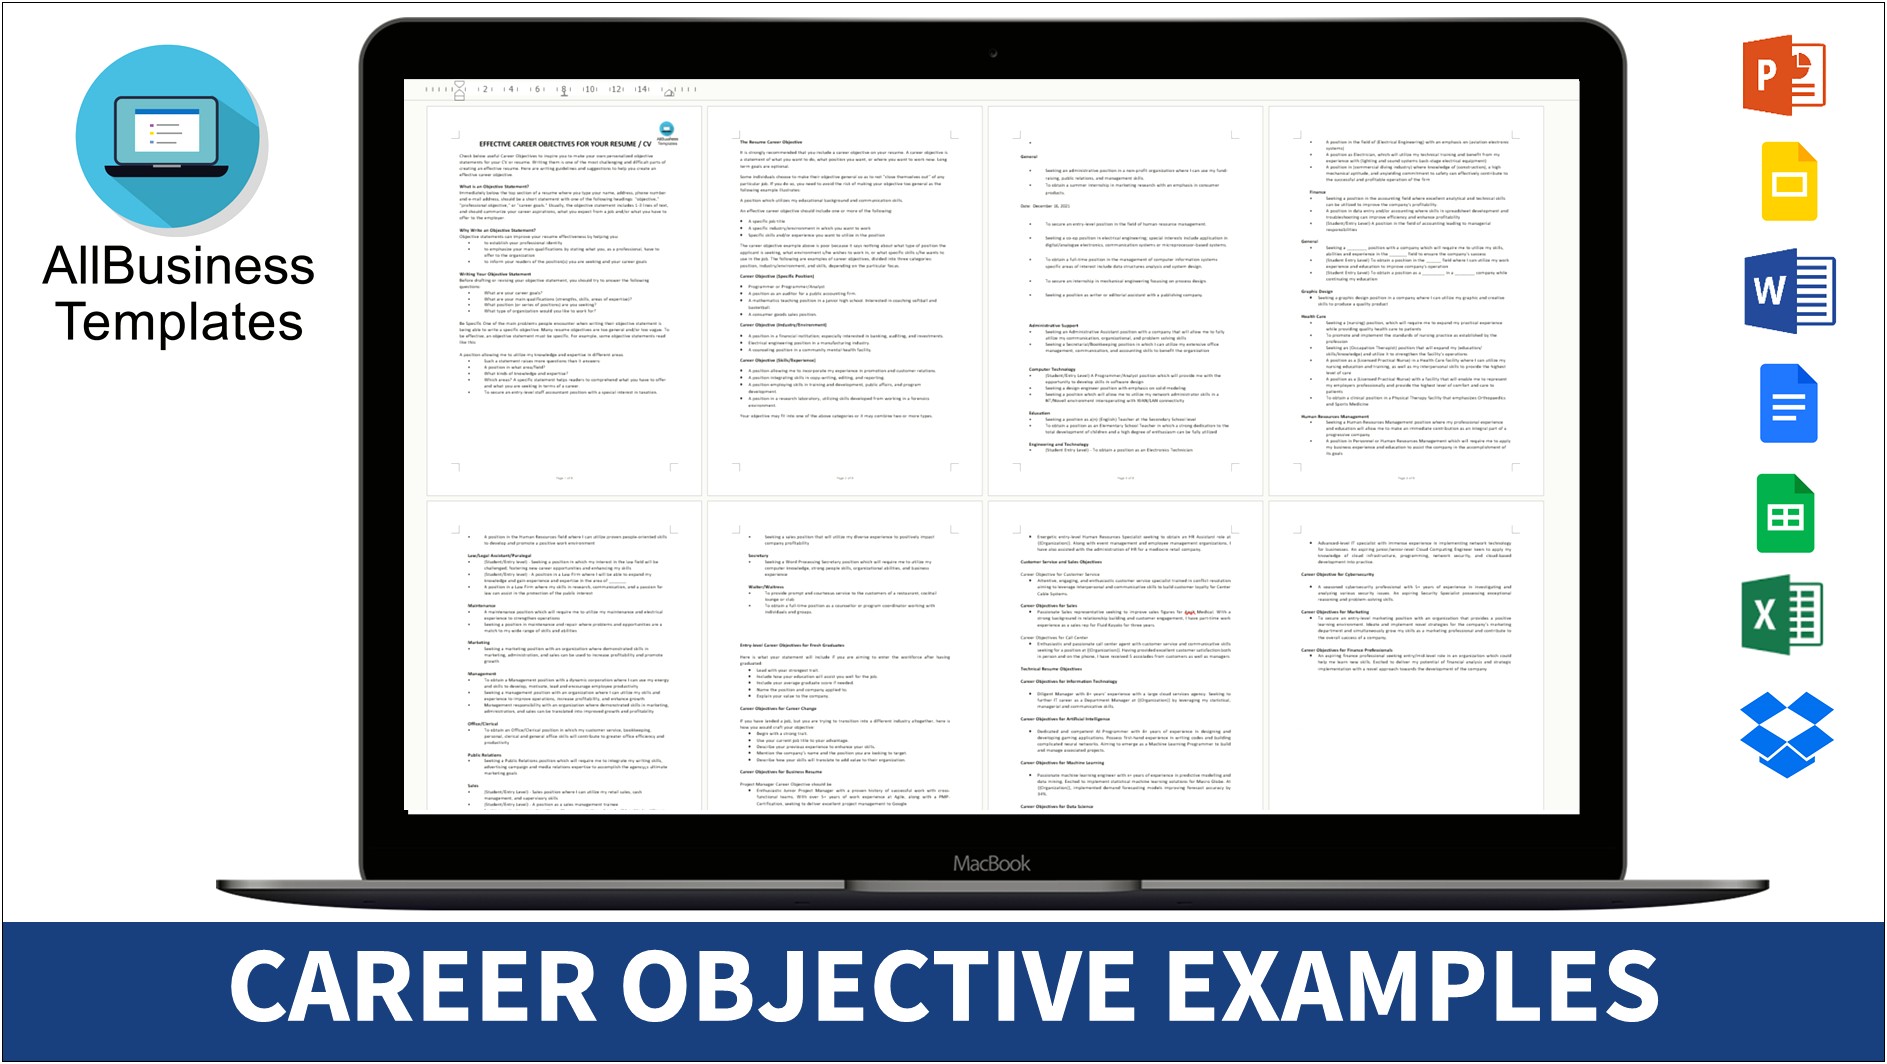 General Resume Objective Examples For Part Time Jobs